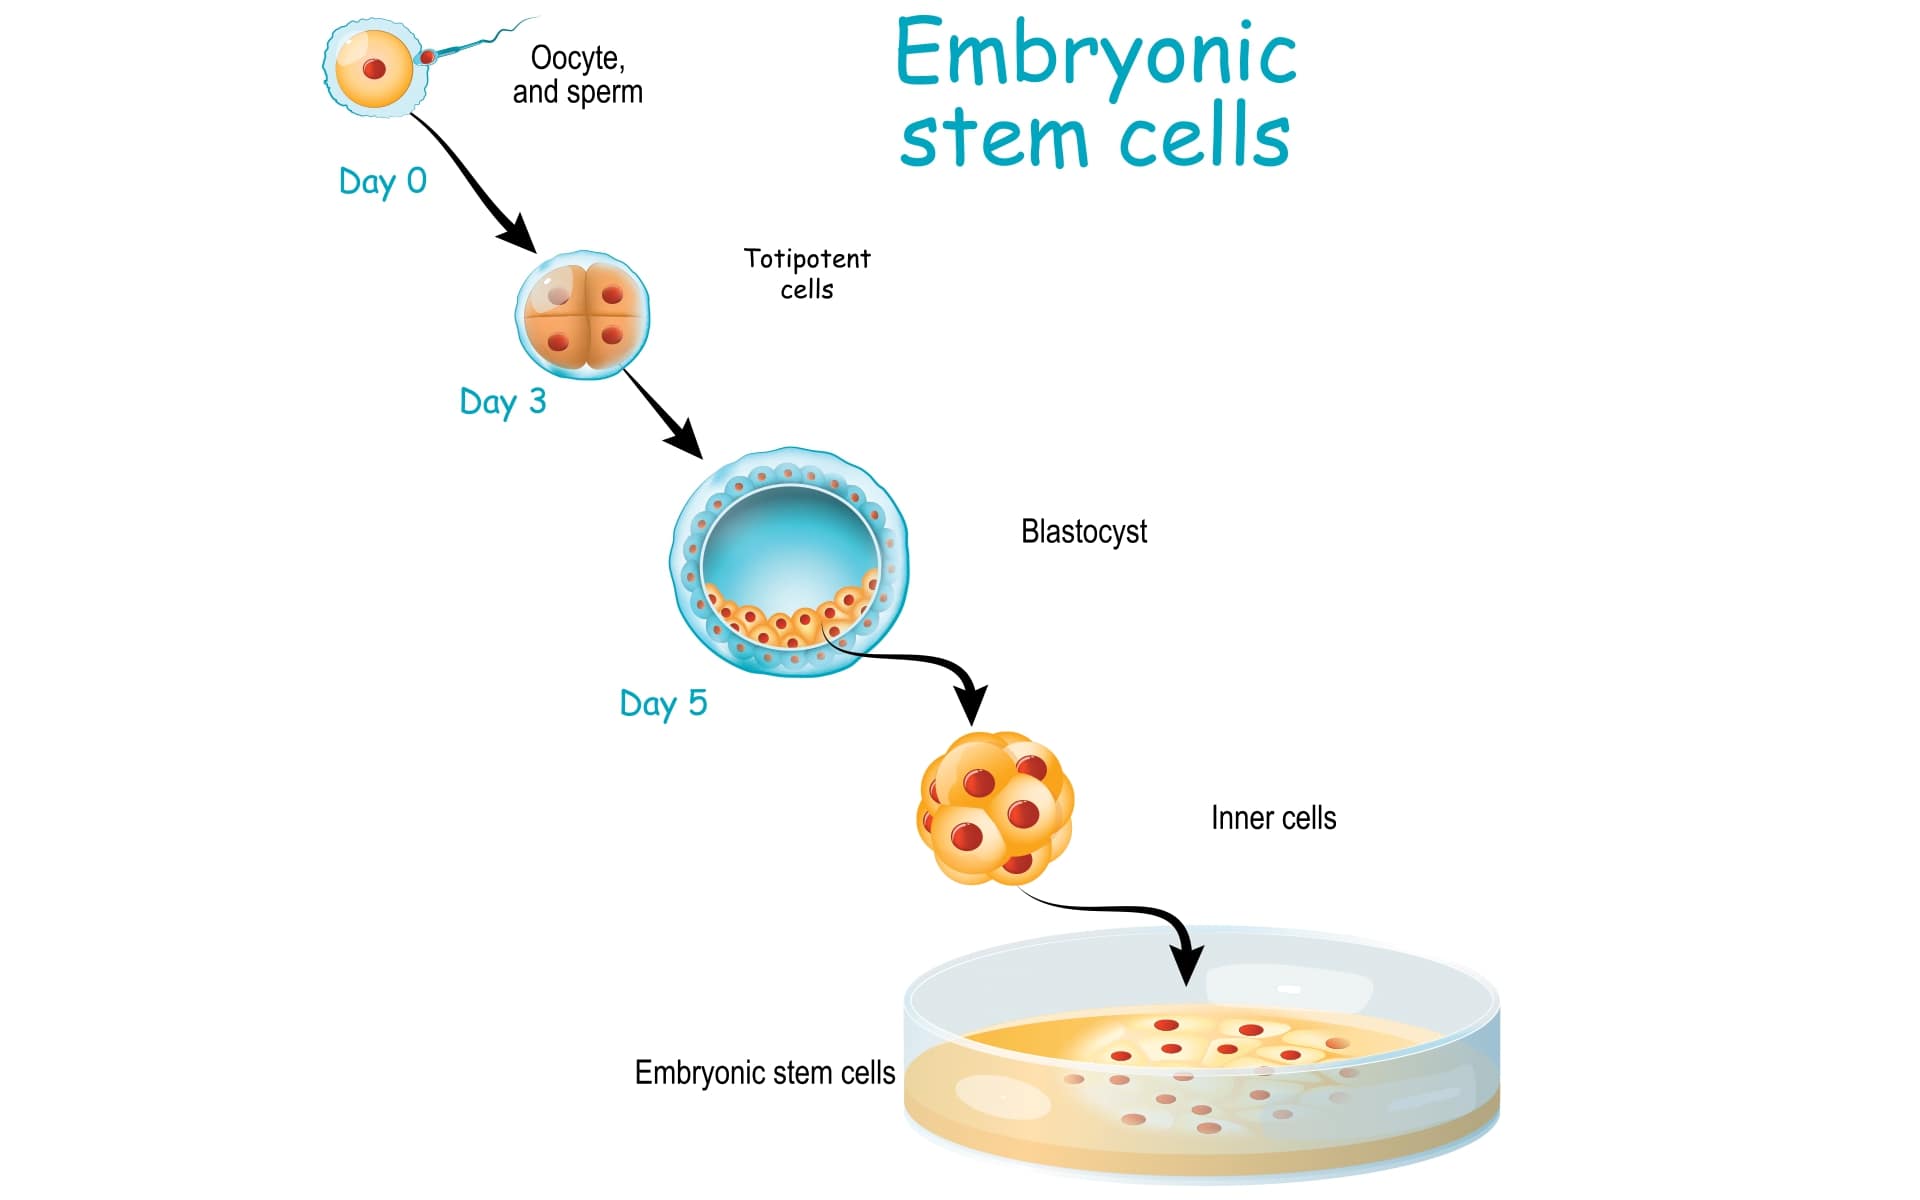 embryonic stem cells research paper outline